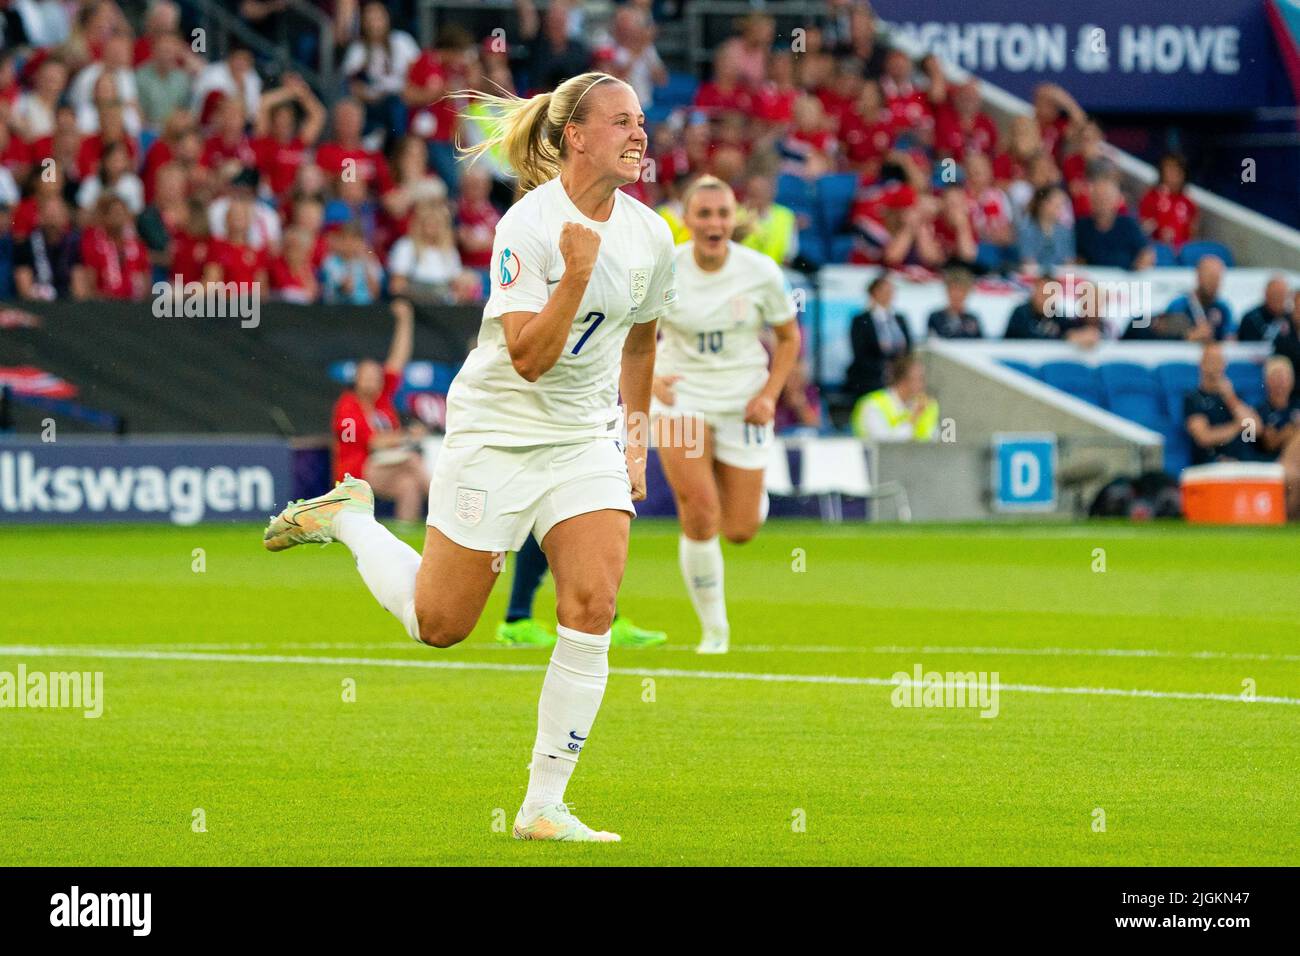 Brighton, UK. 11th July, 2022. Beth Mead (7 England) celebrates Englands fifth goal (5-0) during the UEFA Womens Euro 2022 football match between England and Norway at the Community Stadium in Brighton, England. (Foto: Sam Mallia/Sports Press Photo/C - ONE HOUR DEADLINE - ONLY ACTIVATE FTP IF IMAGES LESS THAN ONE HOUR OLD - Alamy) Credit: SPP Sport Press Photo. /Alamy Live News Stock Photo